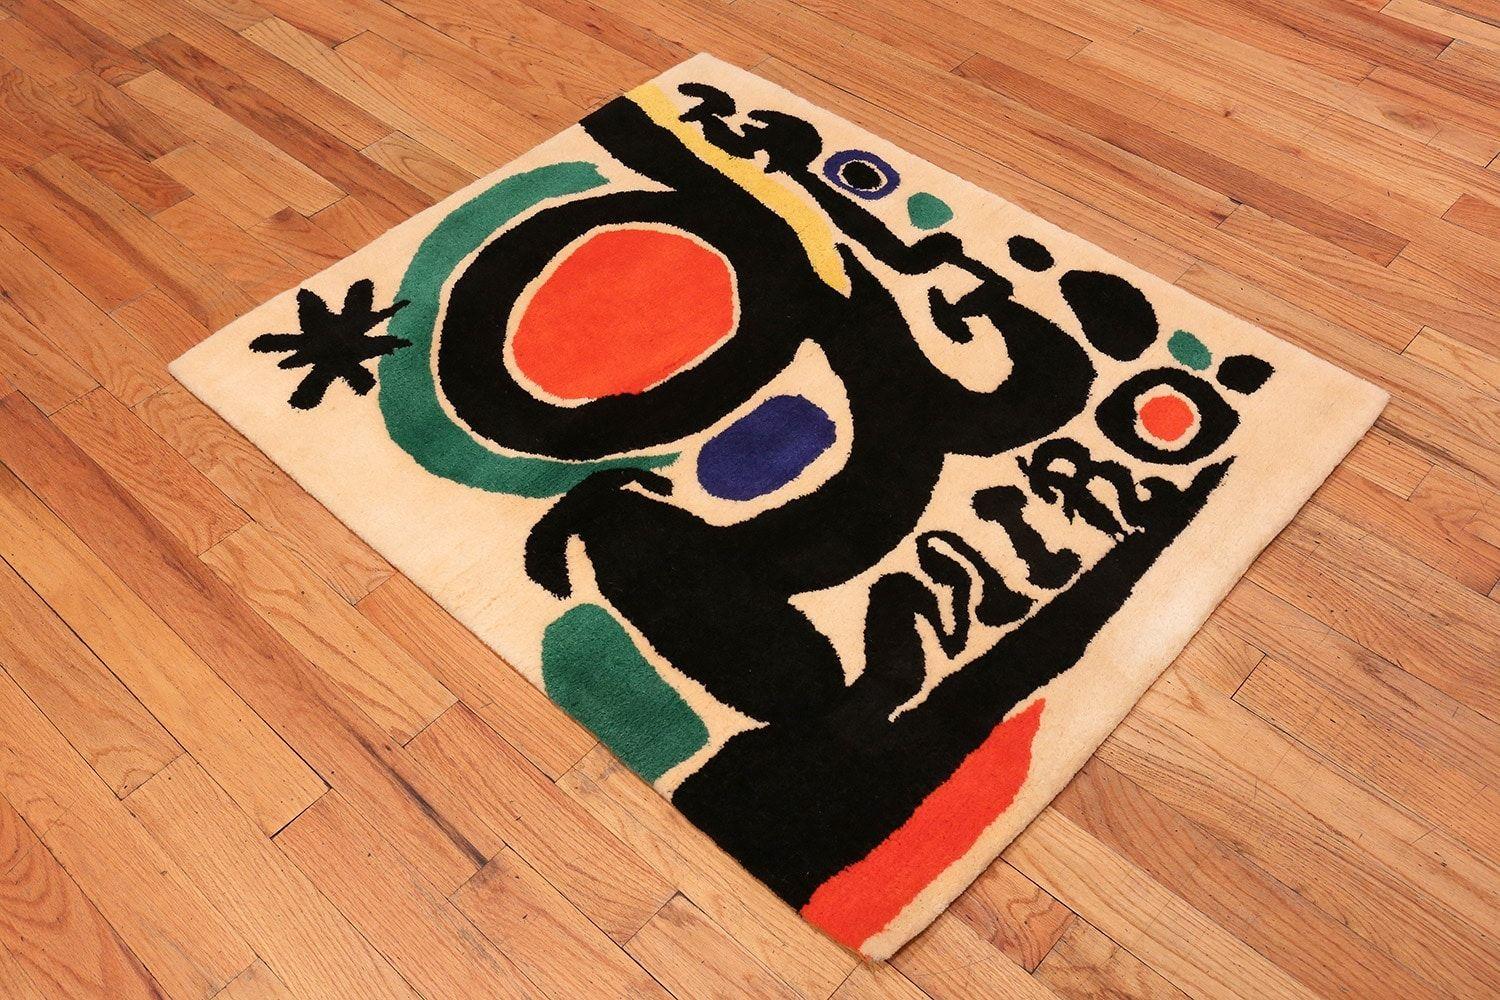 Hand-Woven Small Square Vintage Art Rug in the style of Miro. Size: 3 ft 6 in x 4 ft 3 in